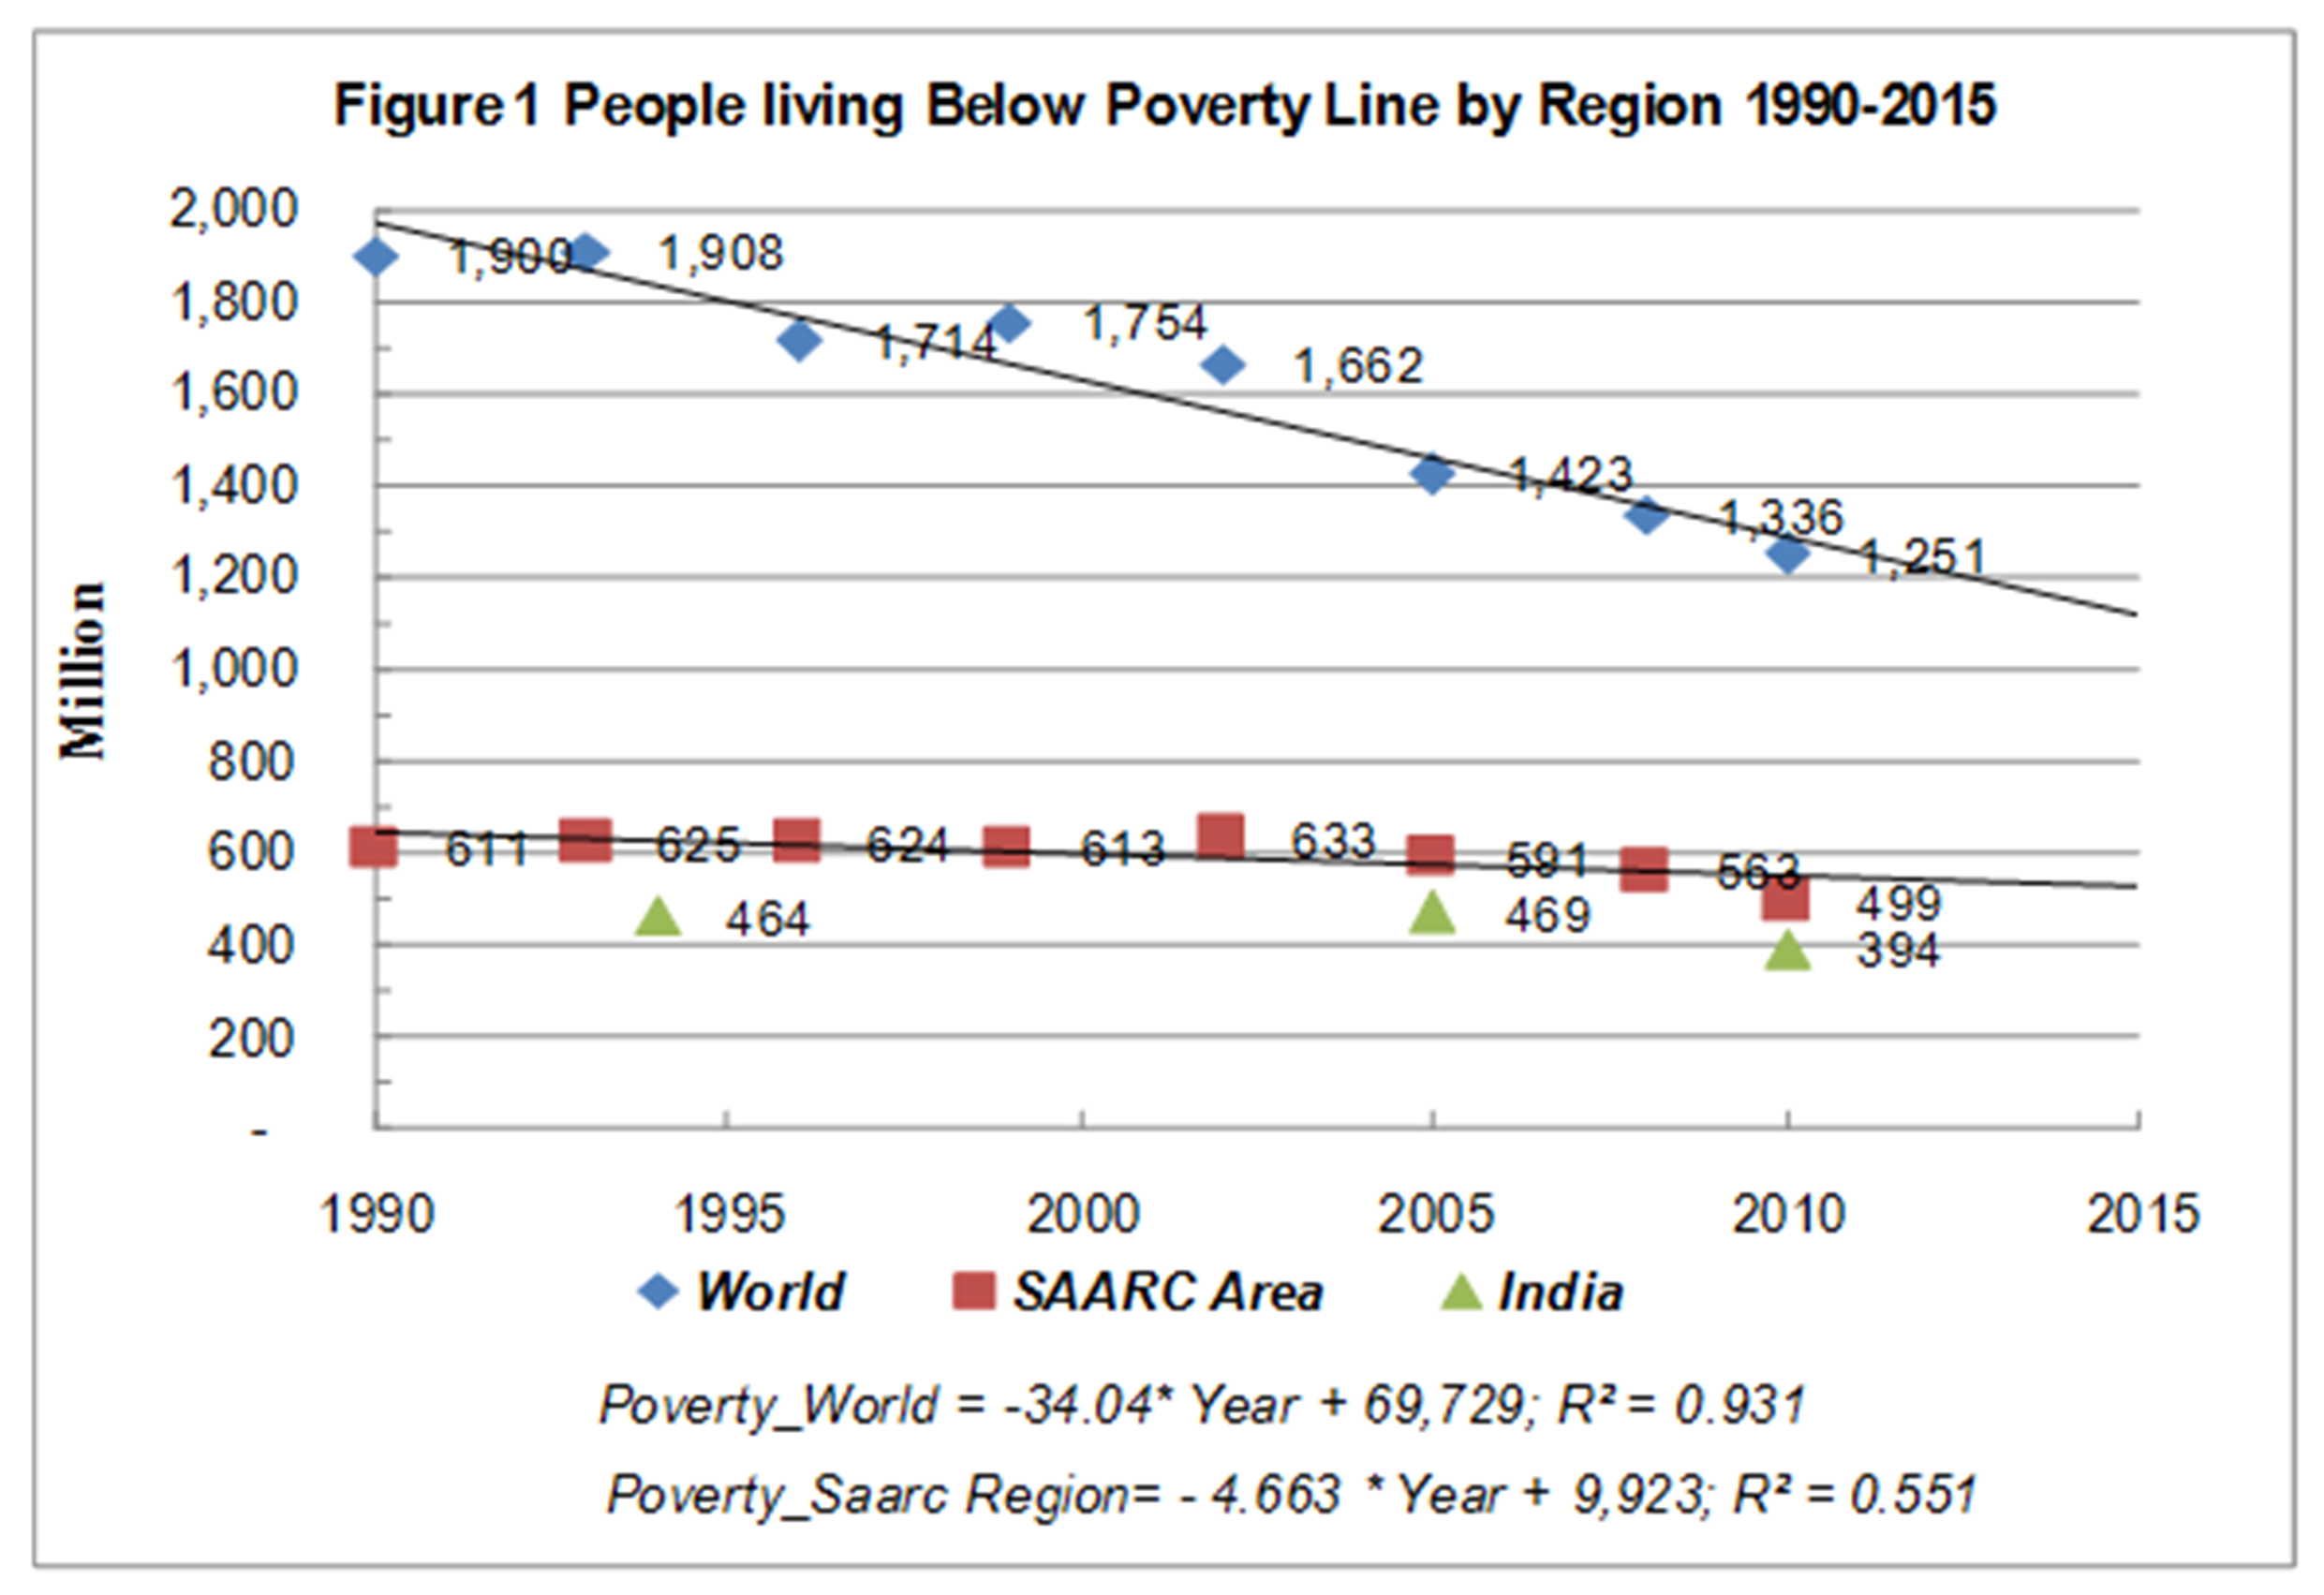 Figure 1(a): Trends in Number and Incidence of Poverty in South Asian Country